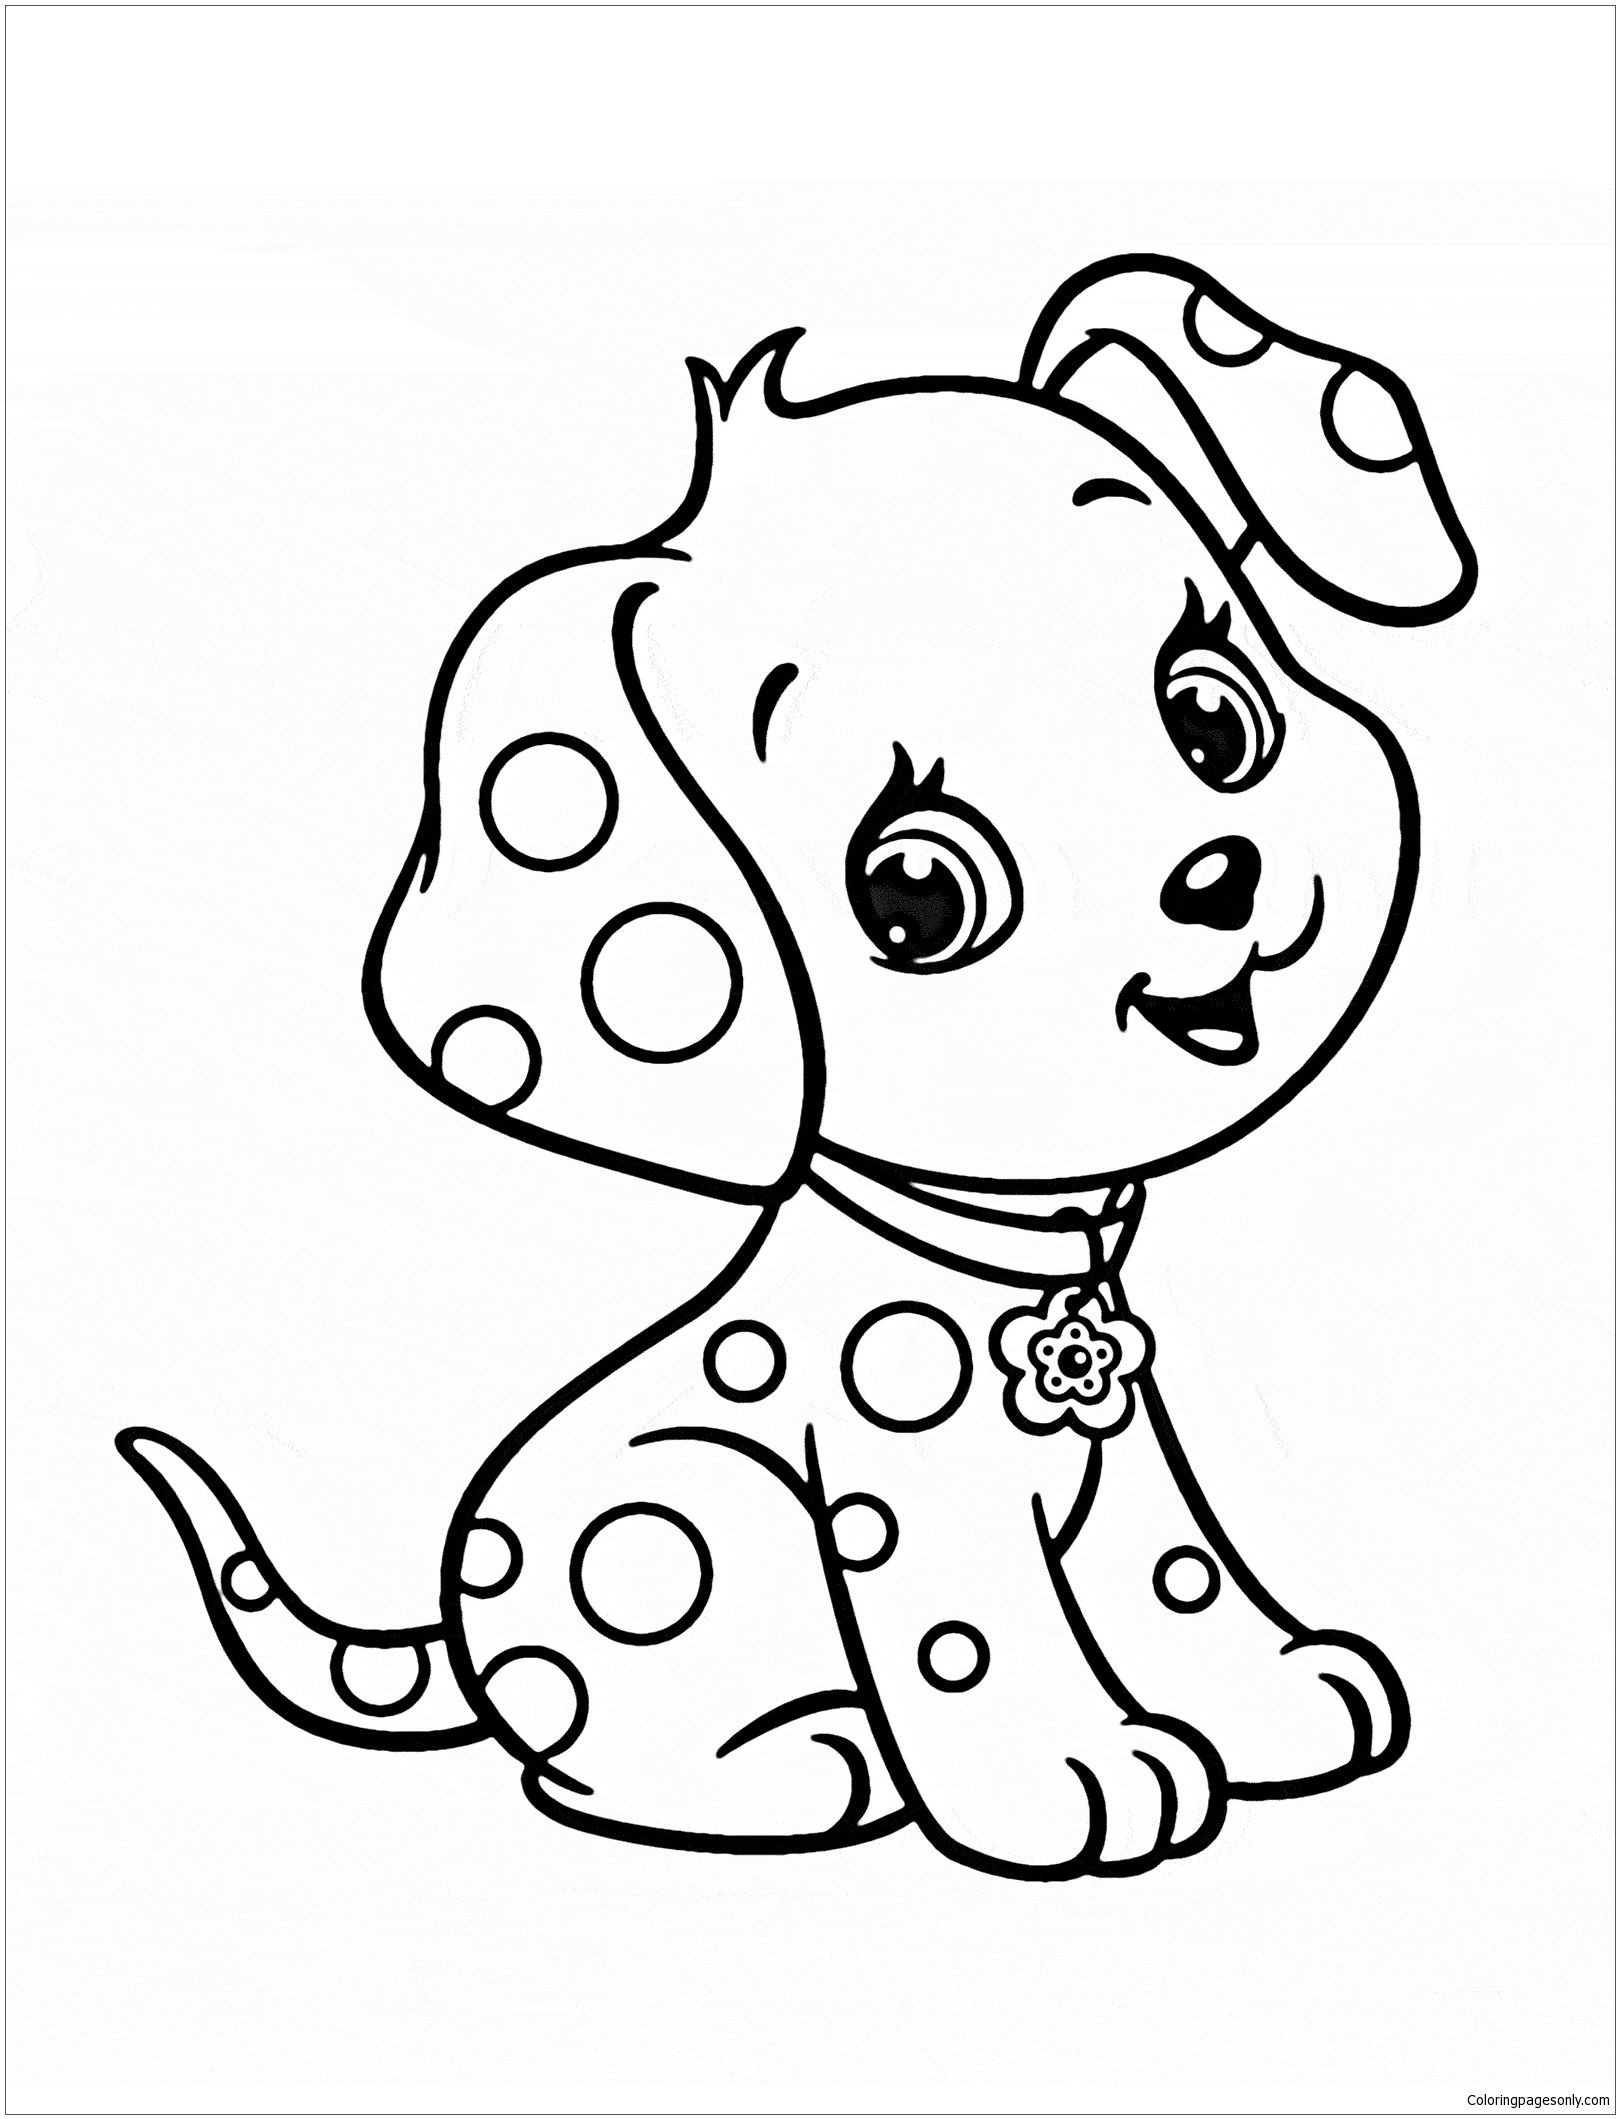 Cute Puppy Coloring Pages For Girls
 Cute Puppy 5 Coloring Page Puppy Coloring Pages